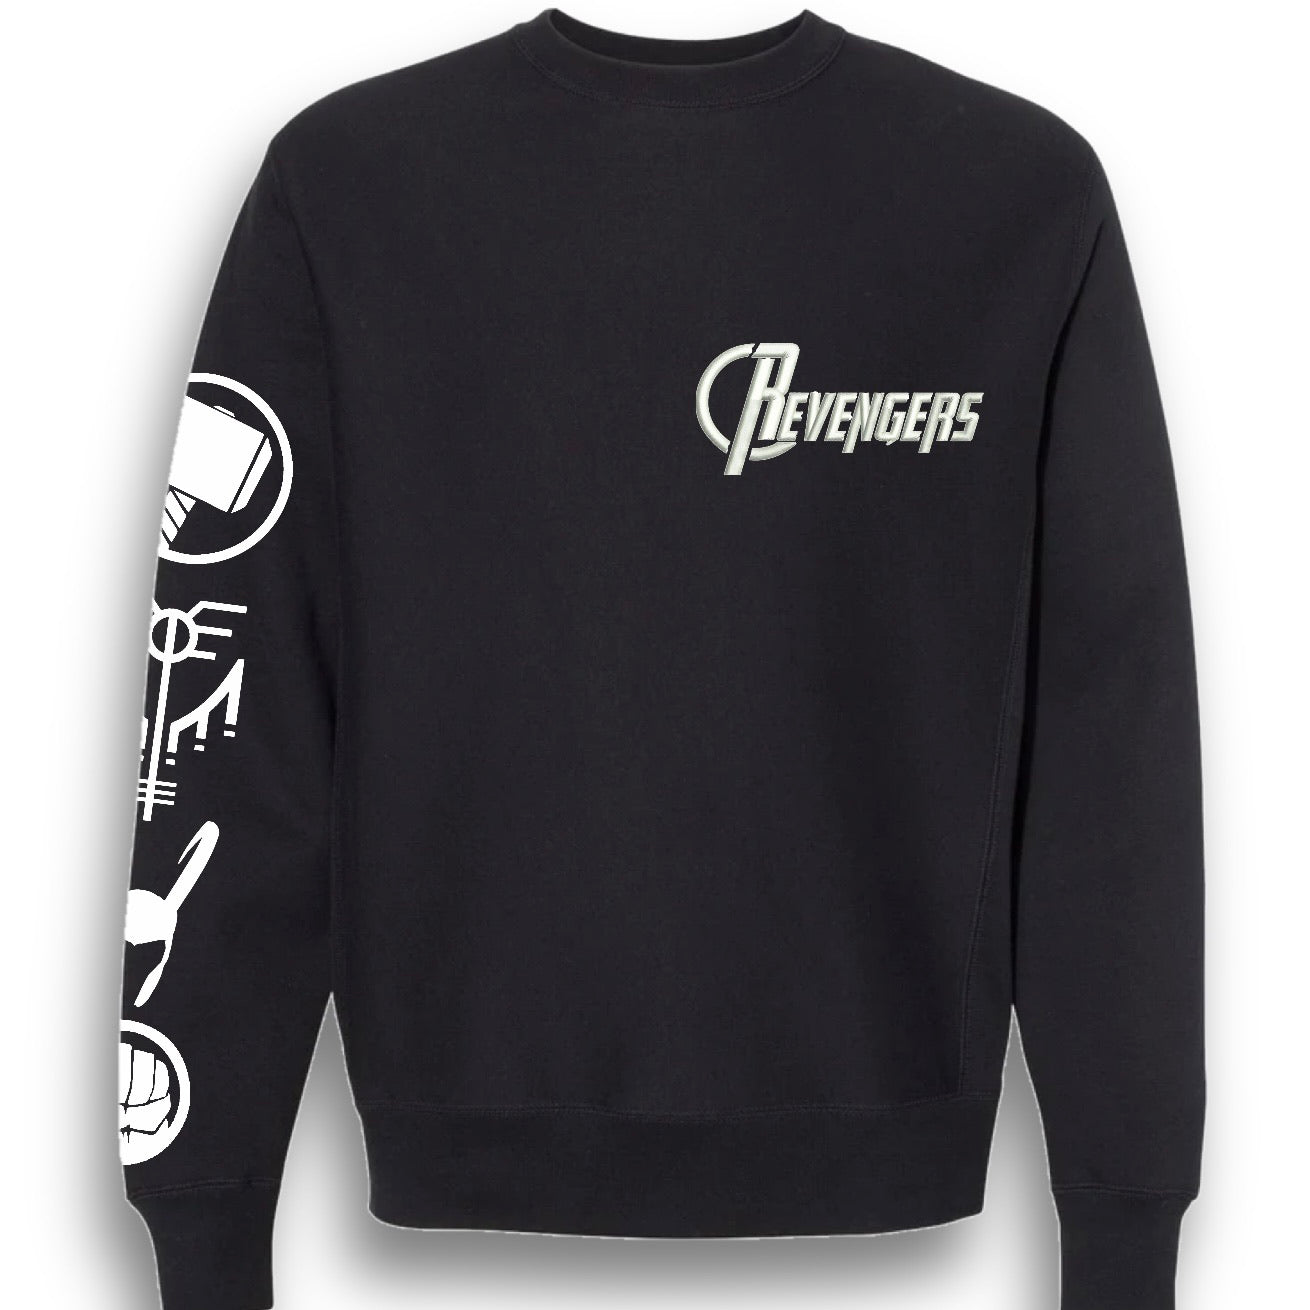 Revengers embroidered pullover Sweatshirt